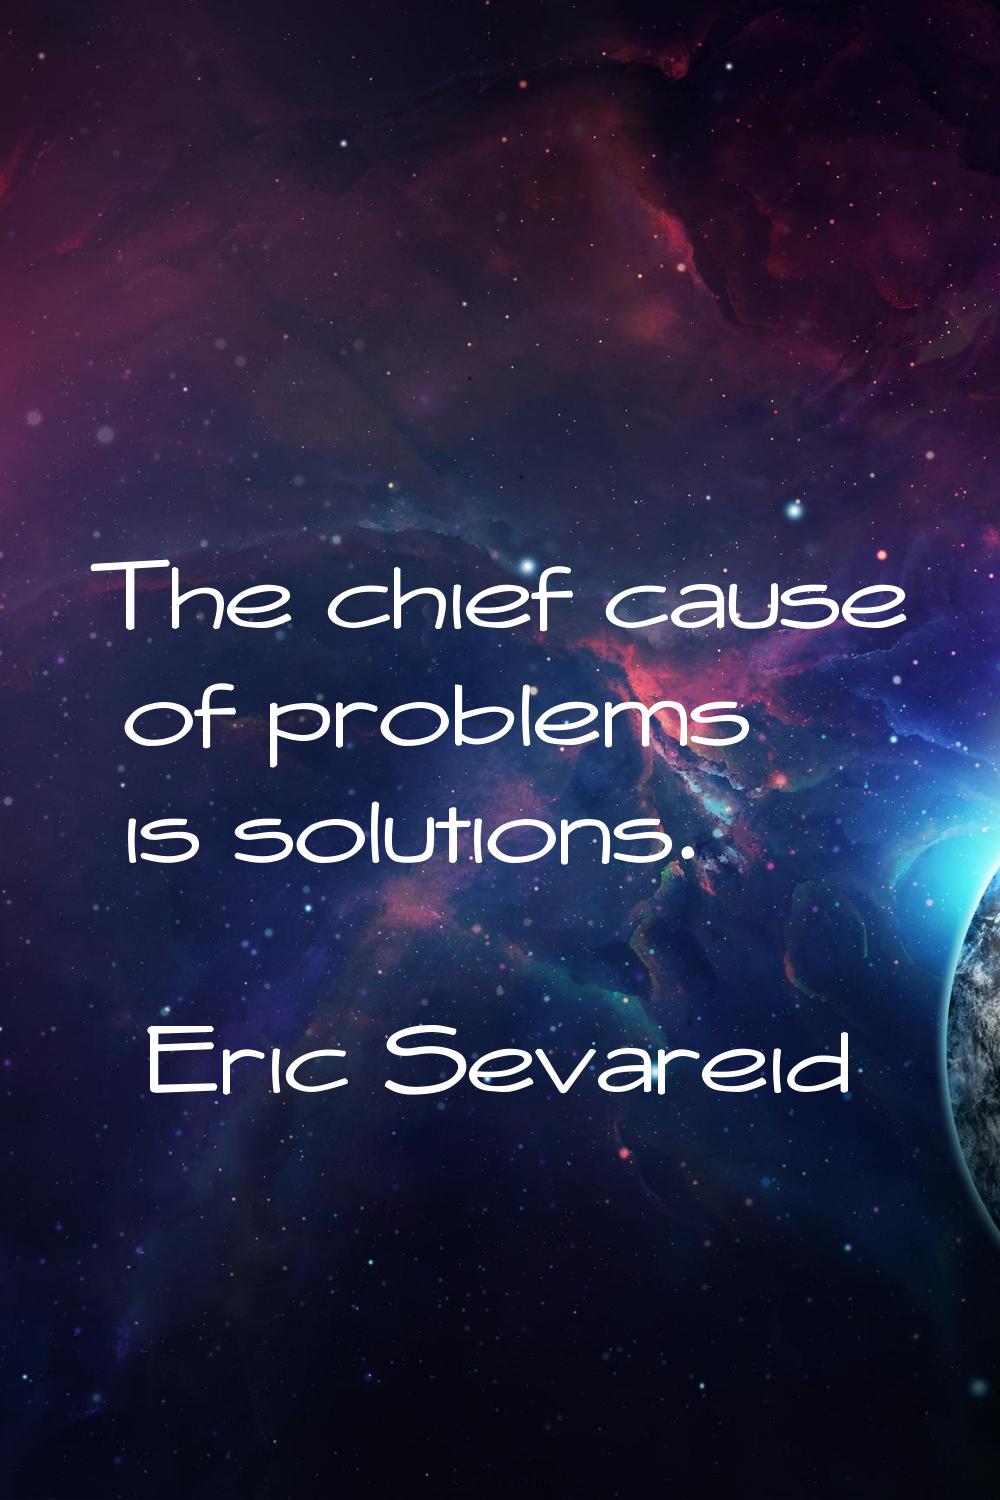 The chief cause of problems is solutions.